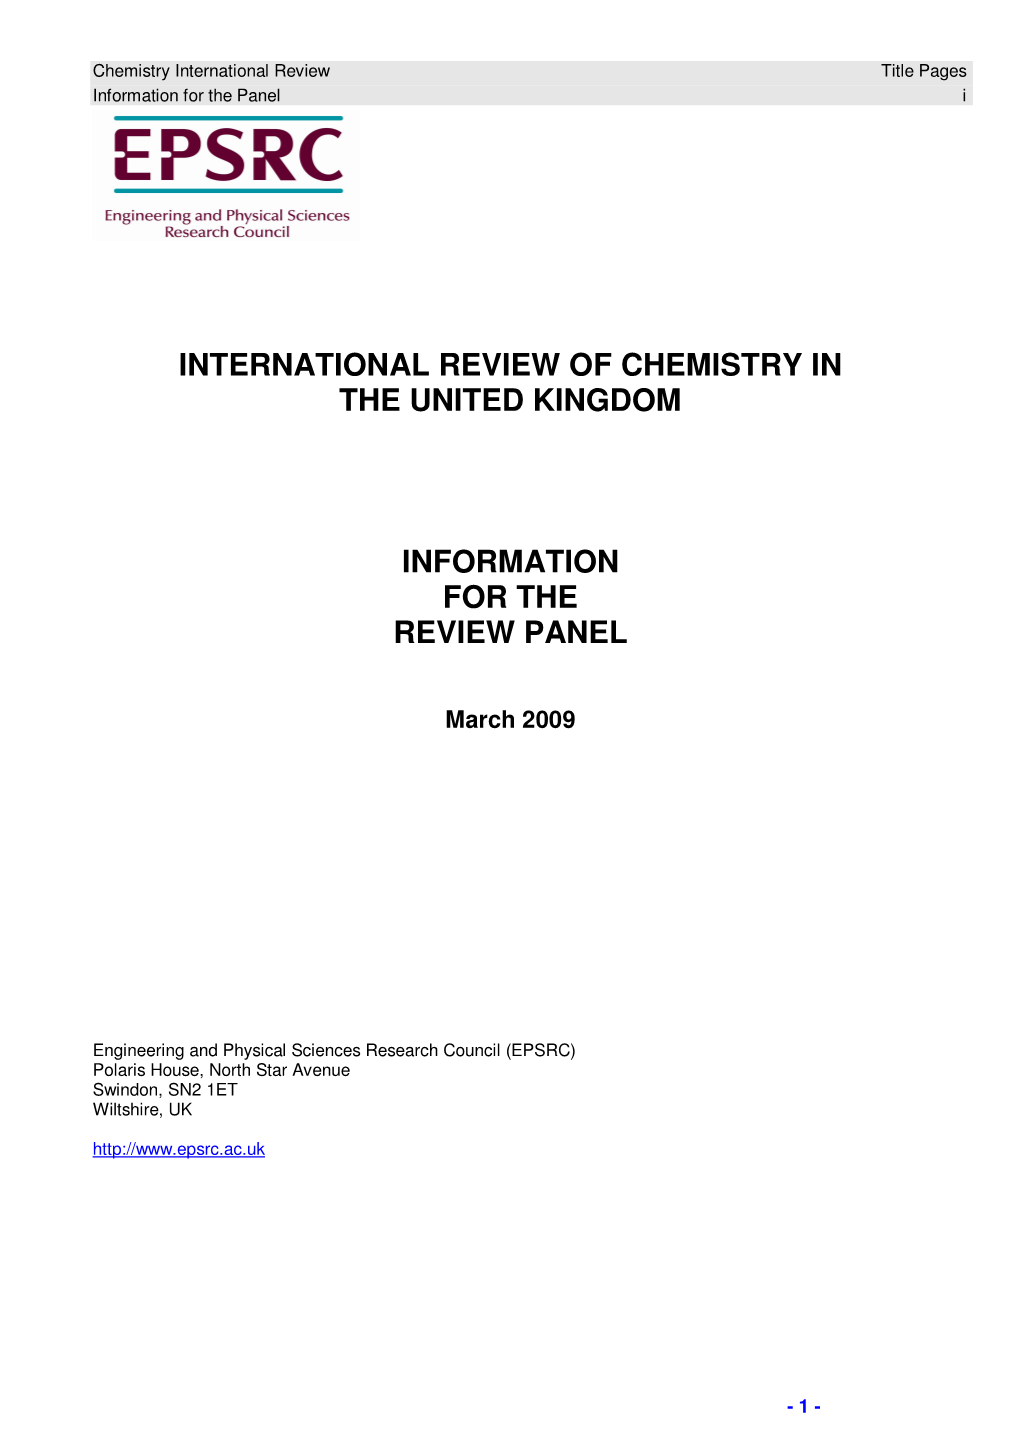 International Review of Chemistry in the UK